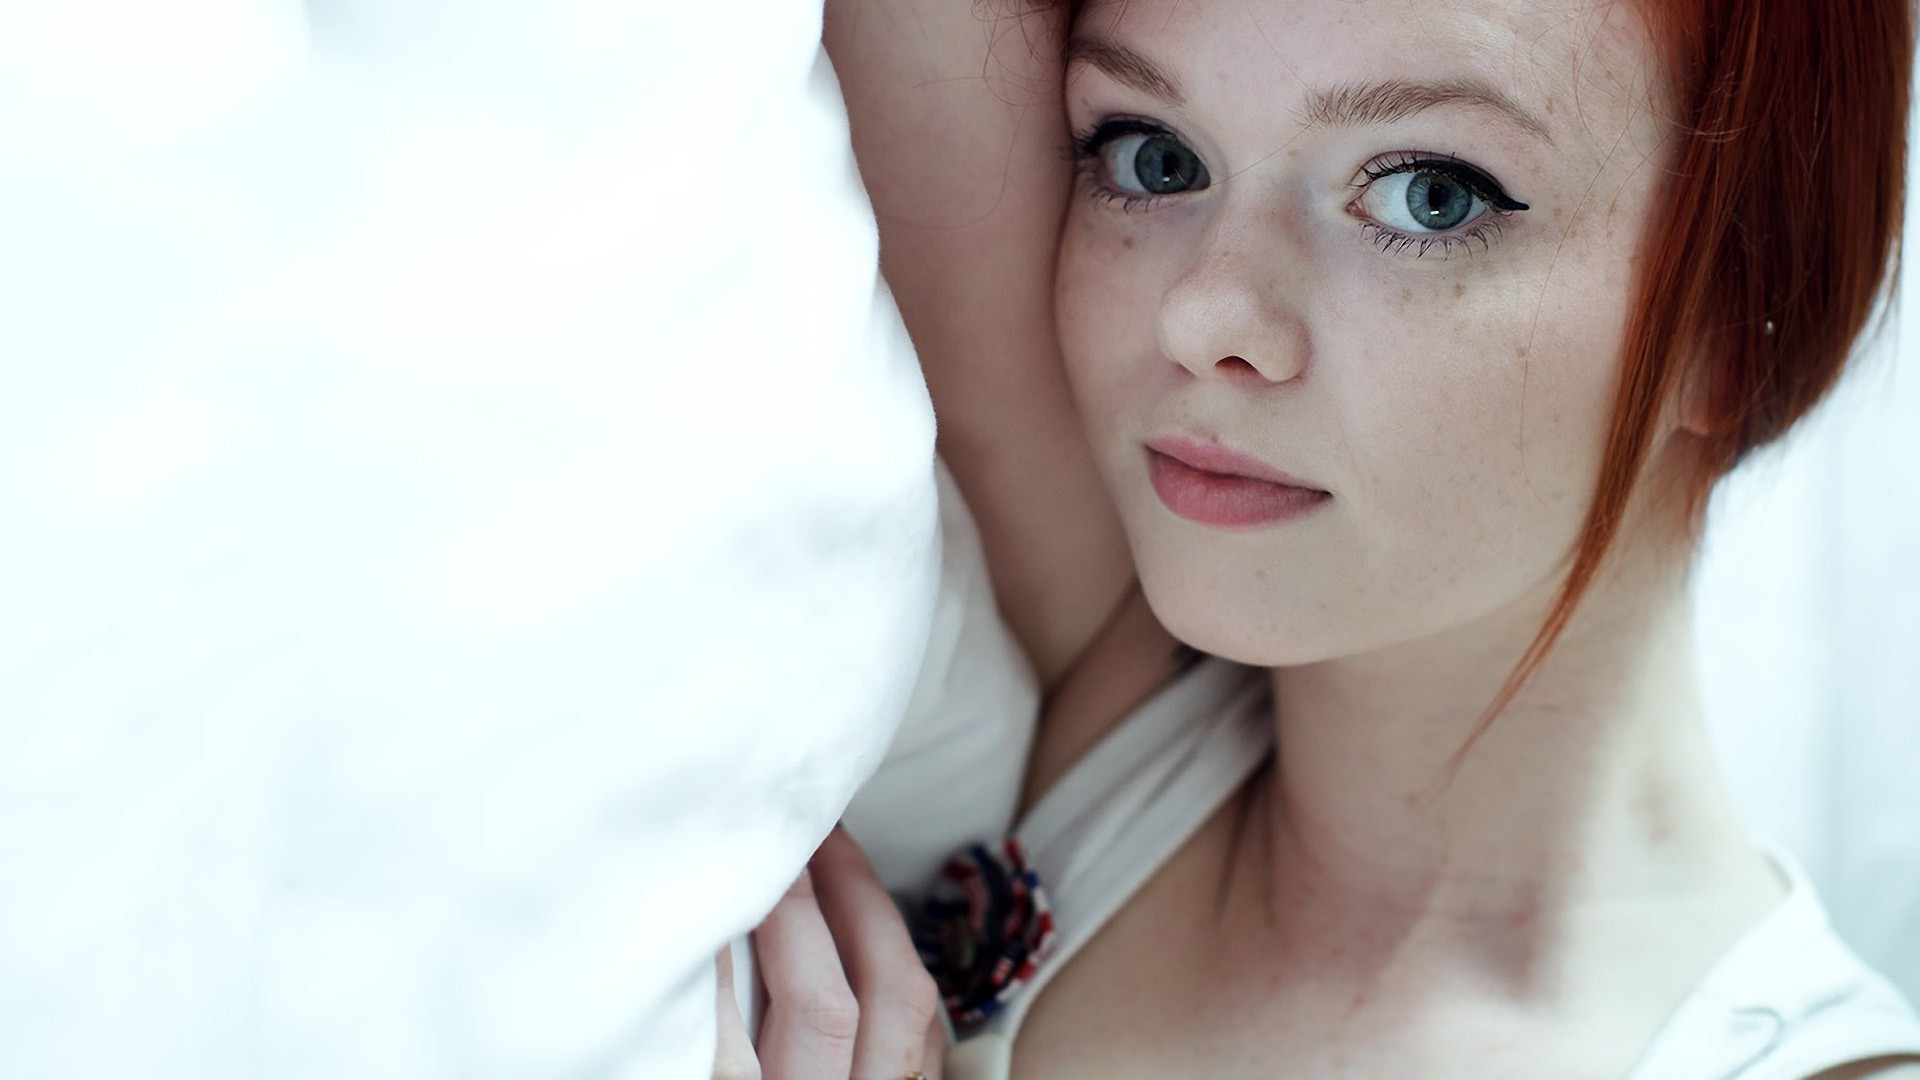 Suicide Girls In Bed Women Redhead Face Blue Eyes